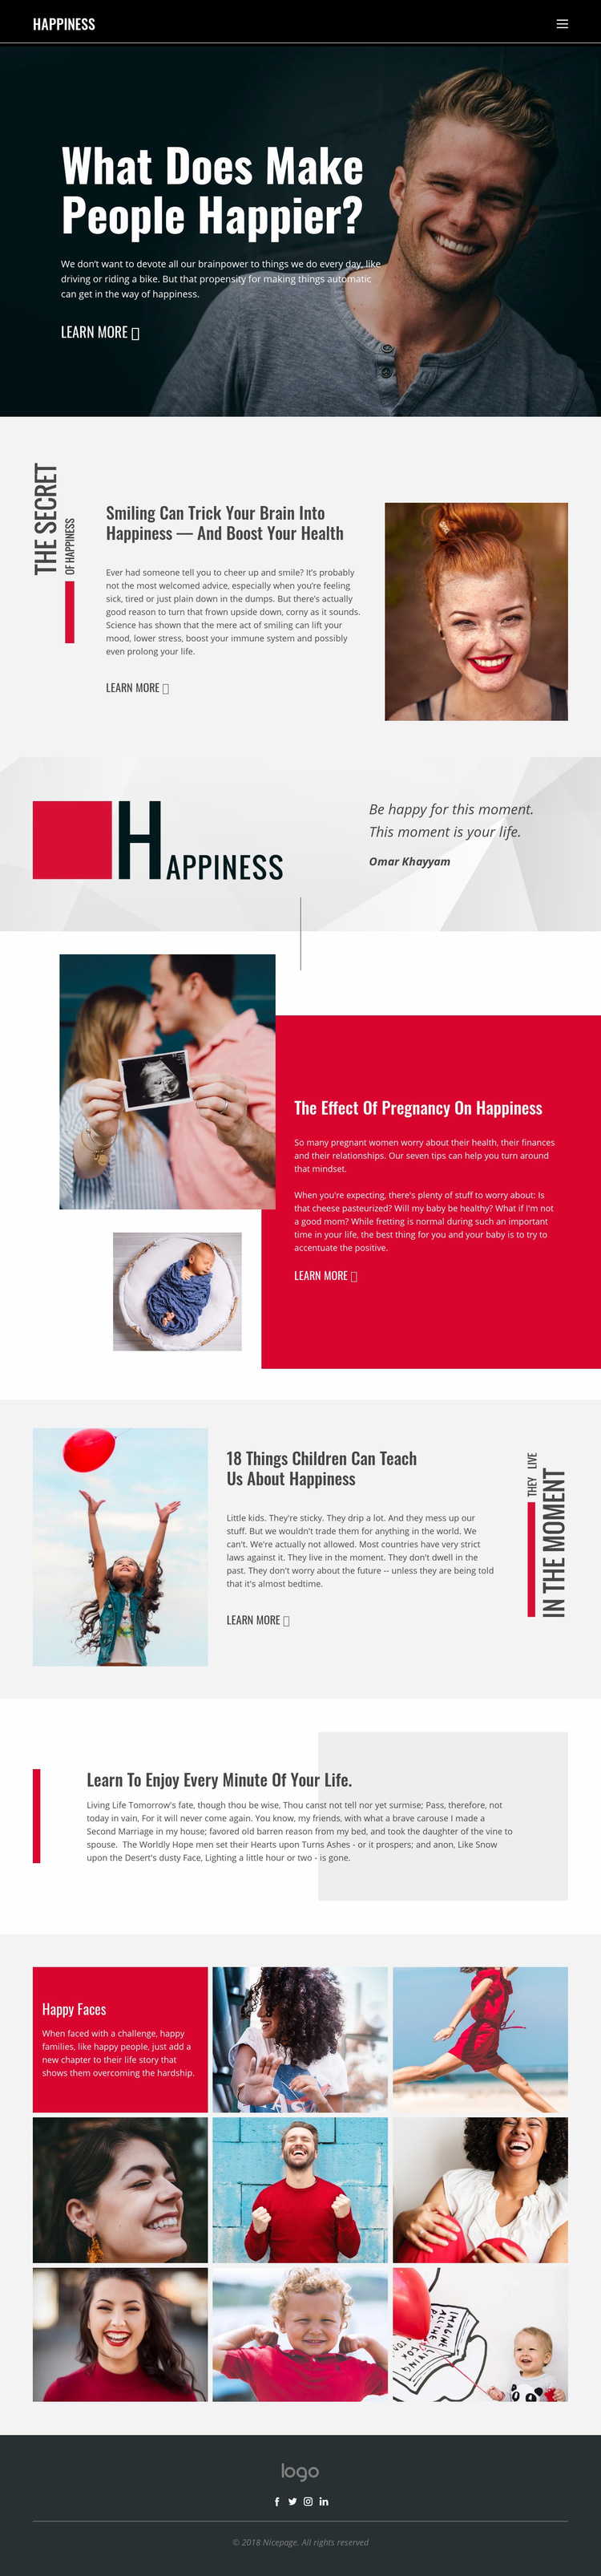 Happiness Web Page Design